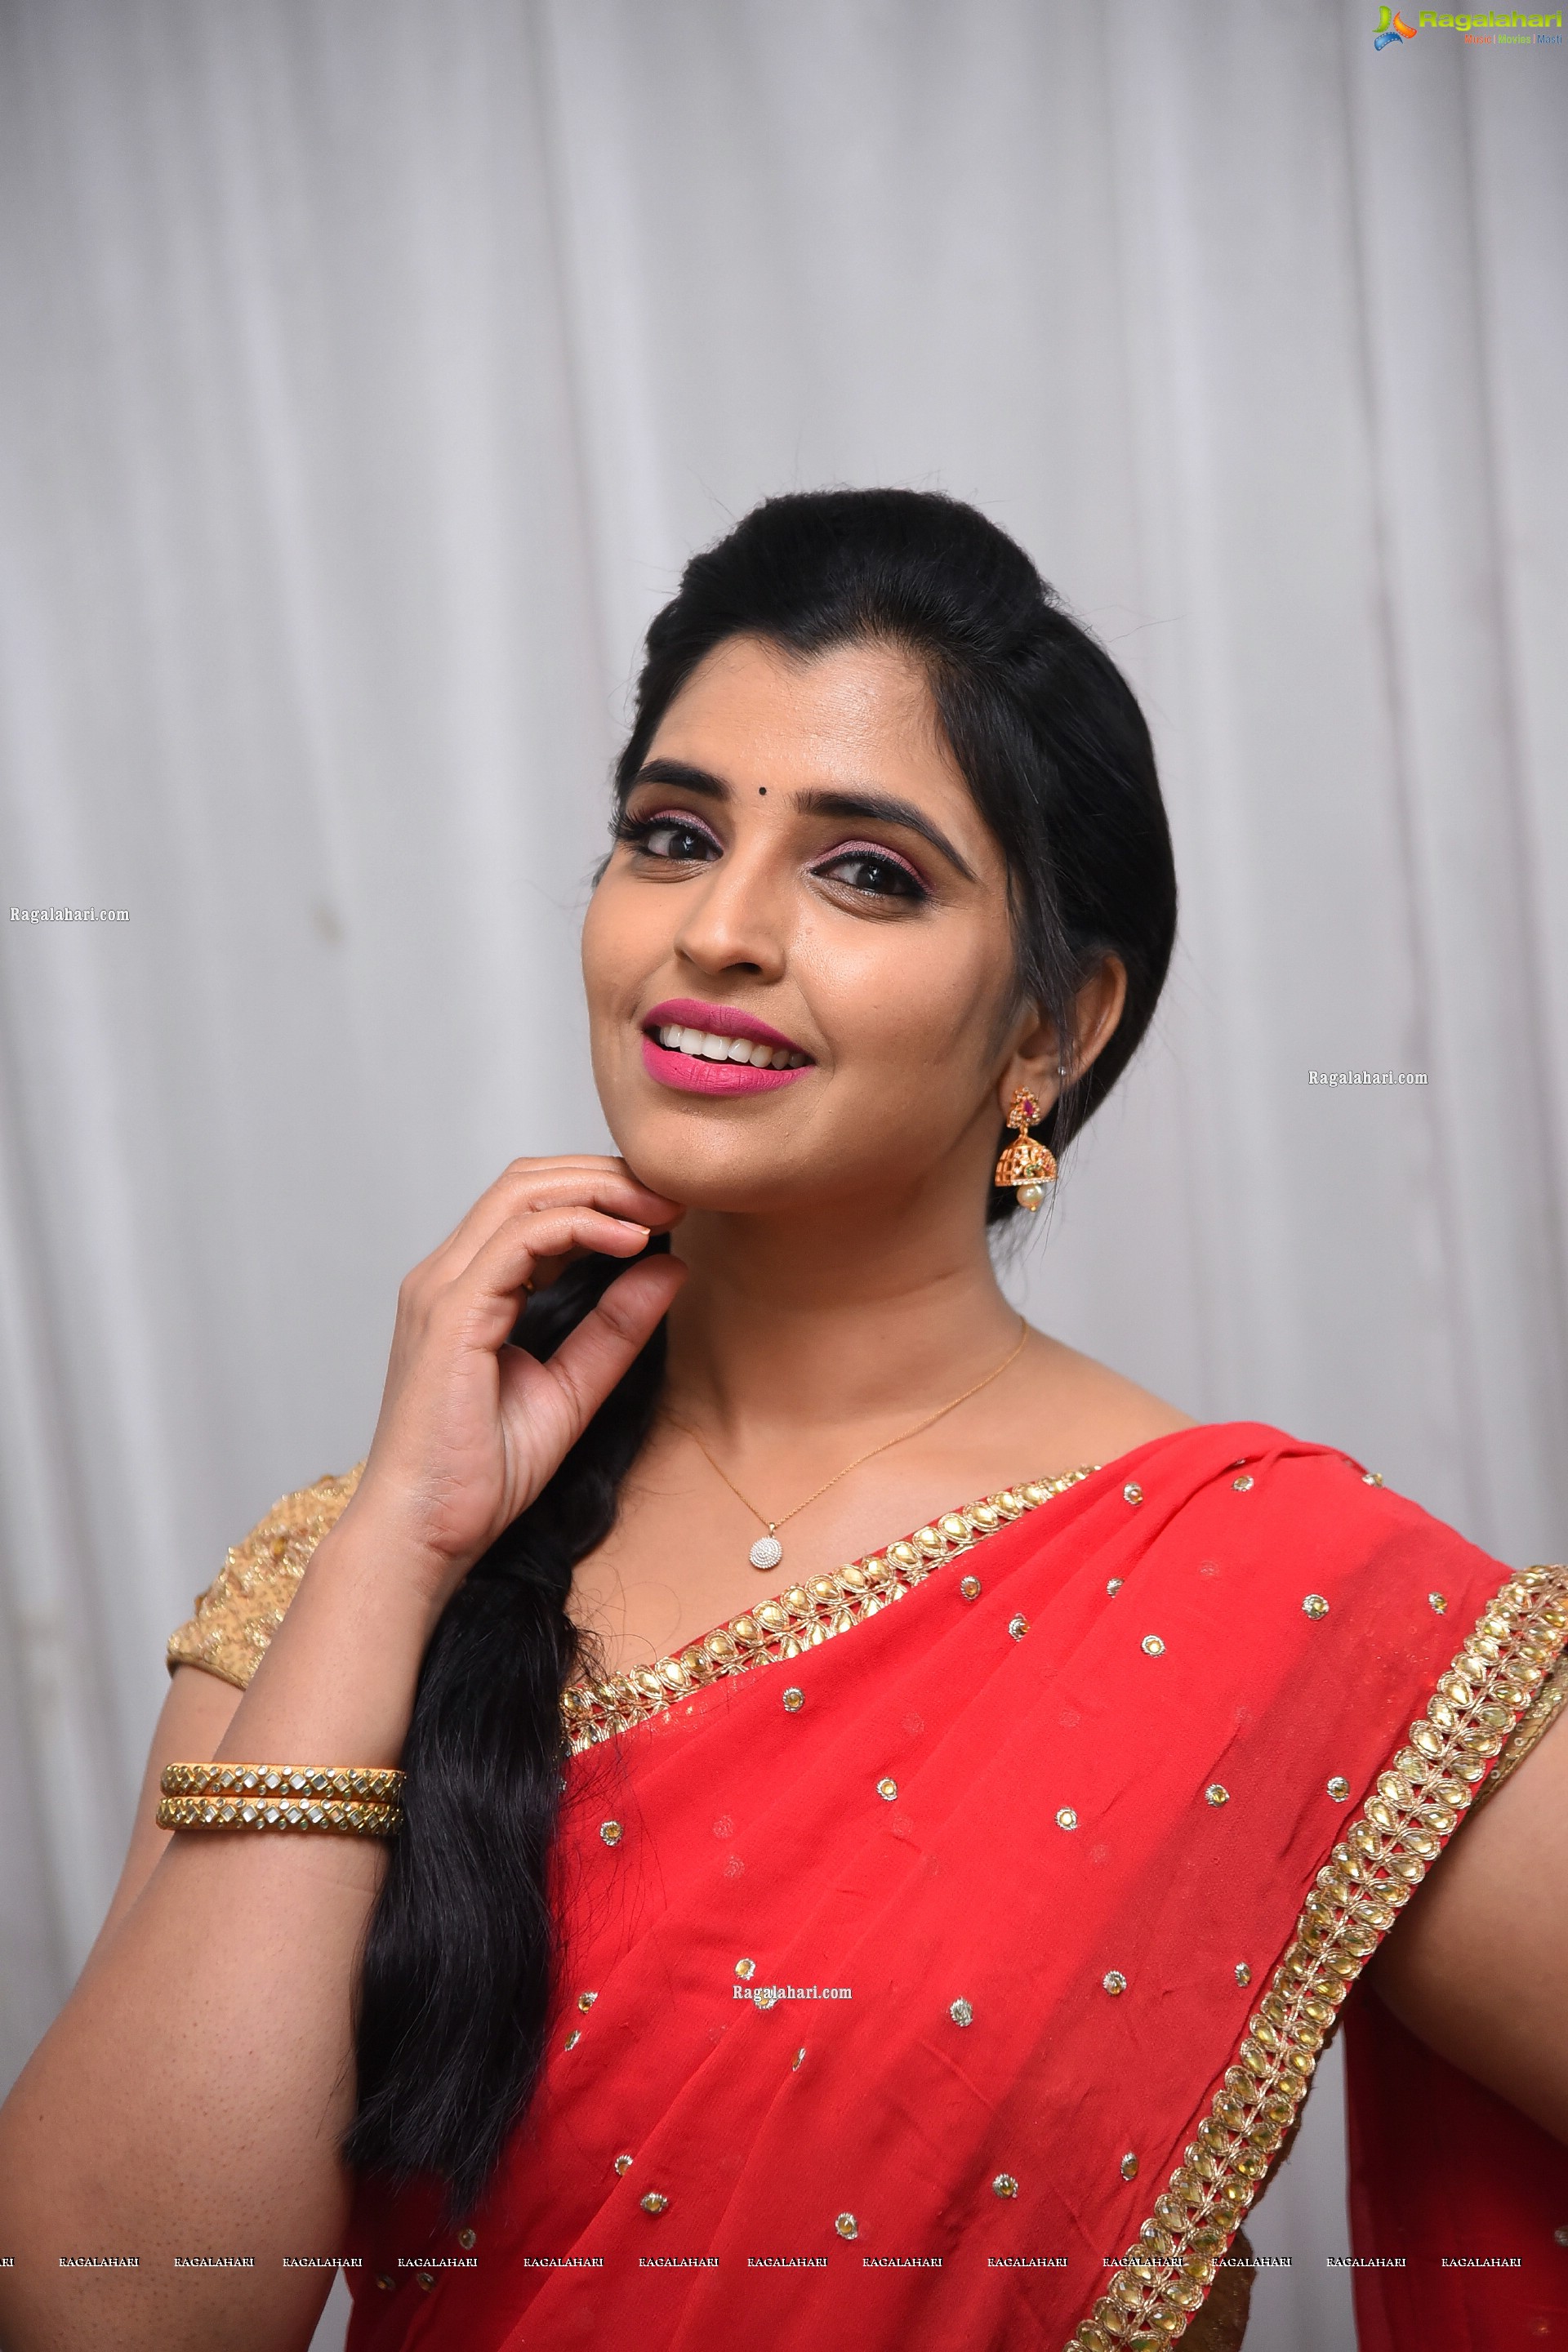 Shyamala in Pink and Red Half Saree, HD Photo Gallery